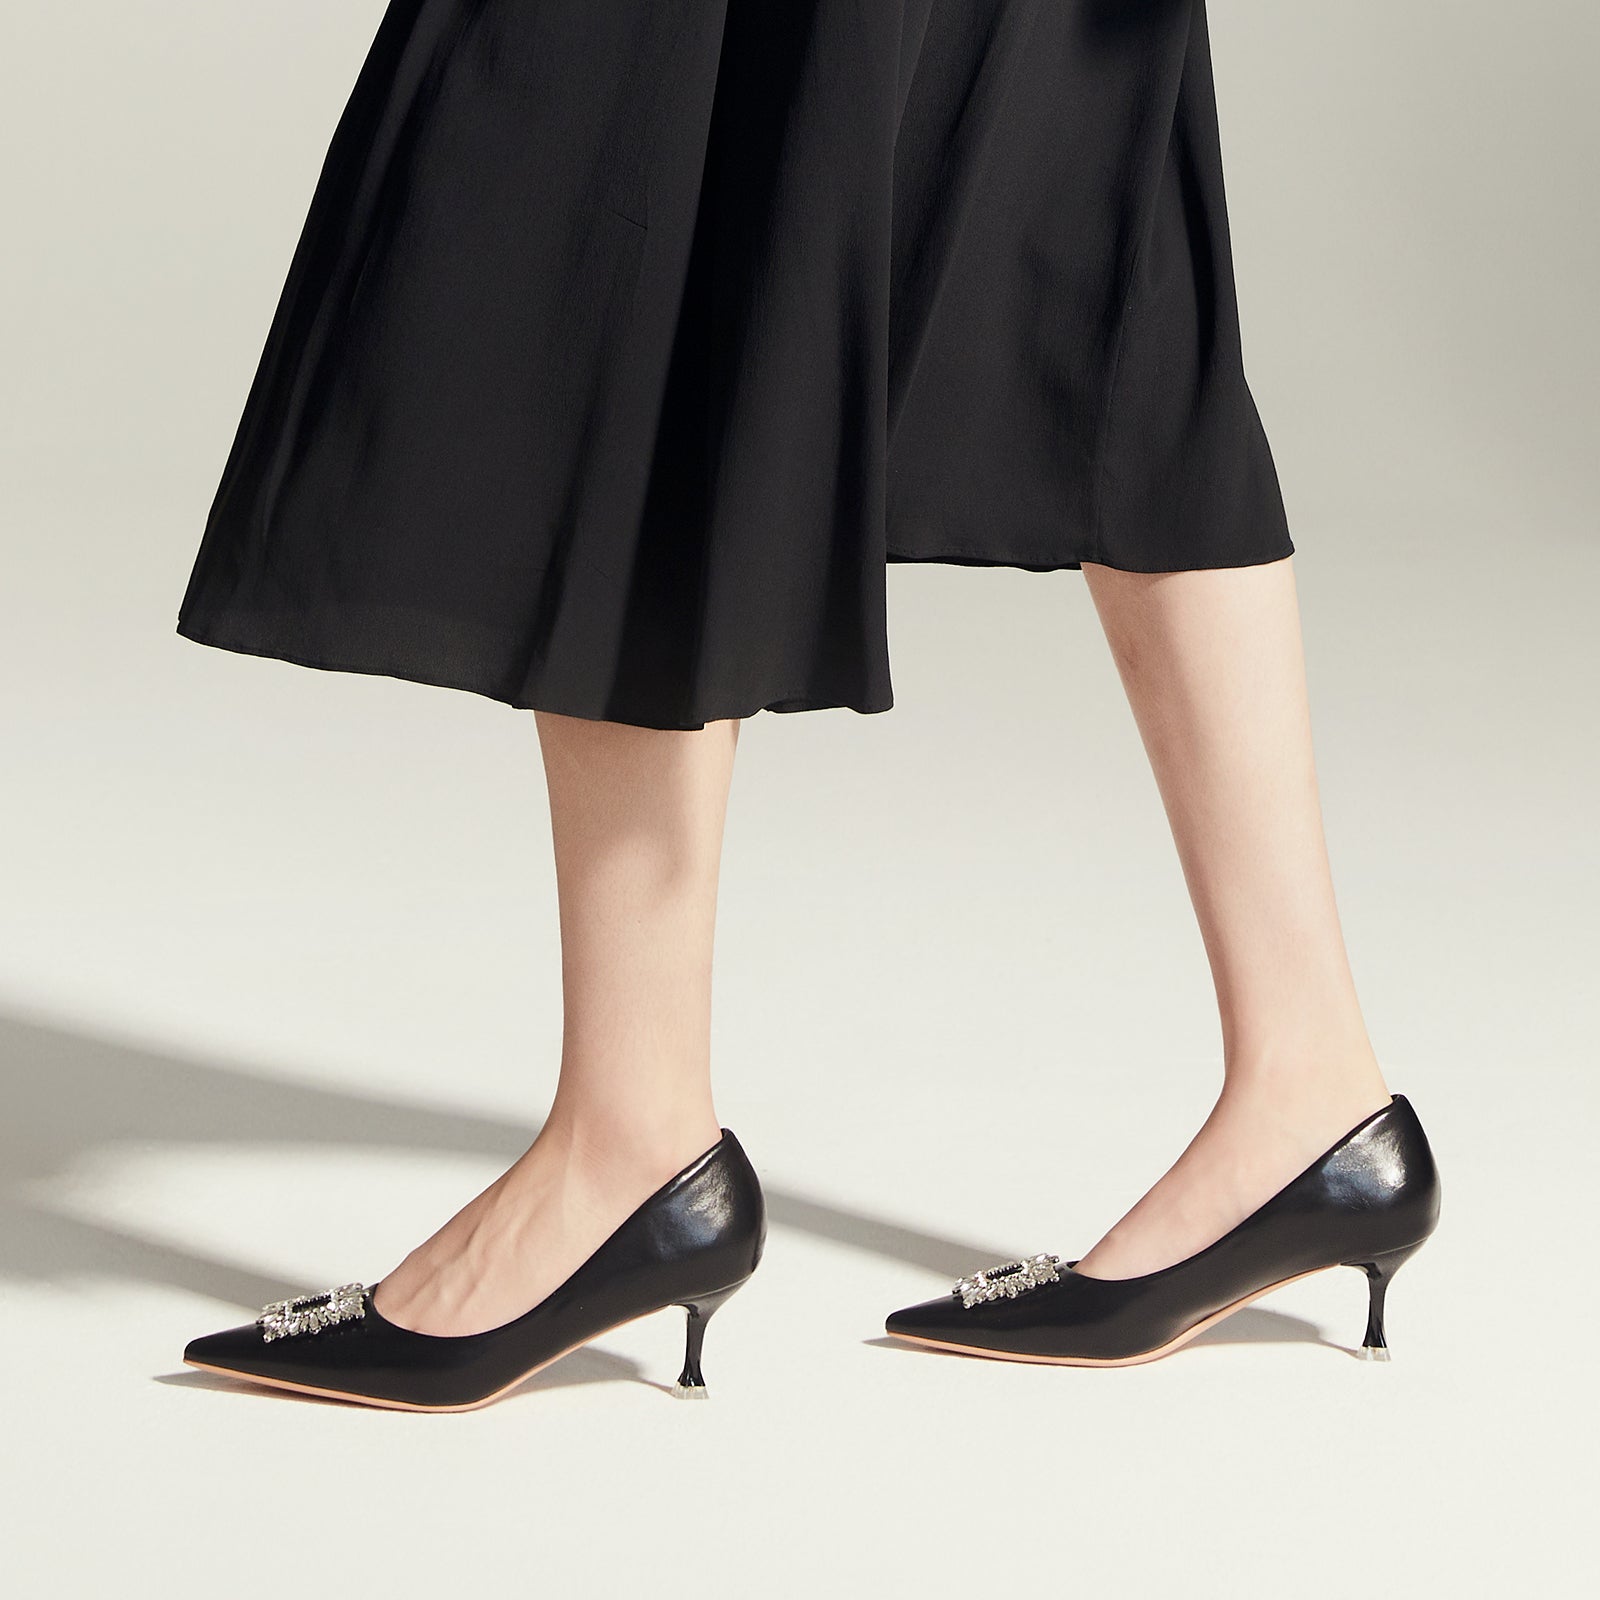 Embrace classic and versatile style with these black pumps, featuring sparkling crystal details and a chic buckle for a timeless look